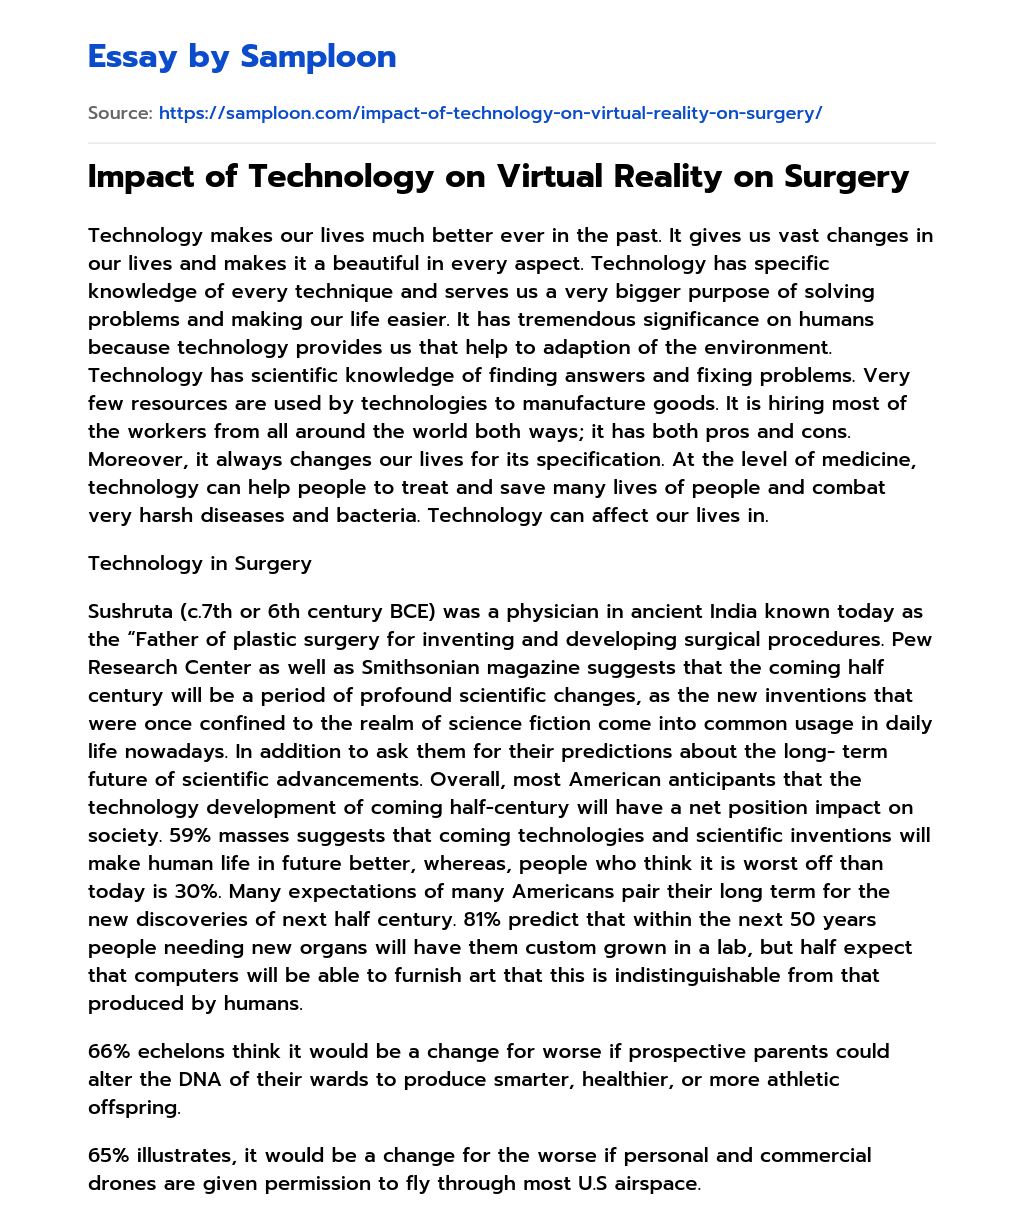 Impact of Technology on Virtual Reality on Surgery essay